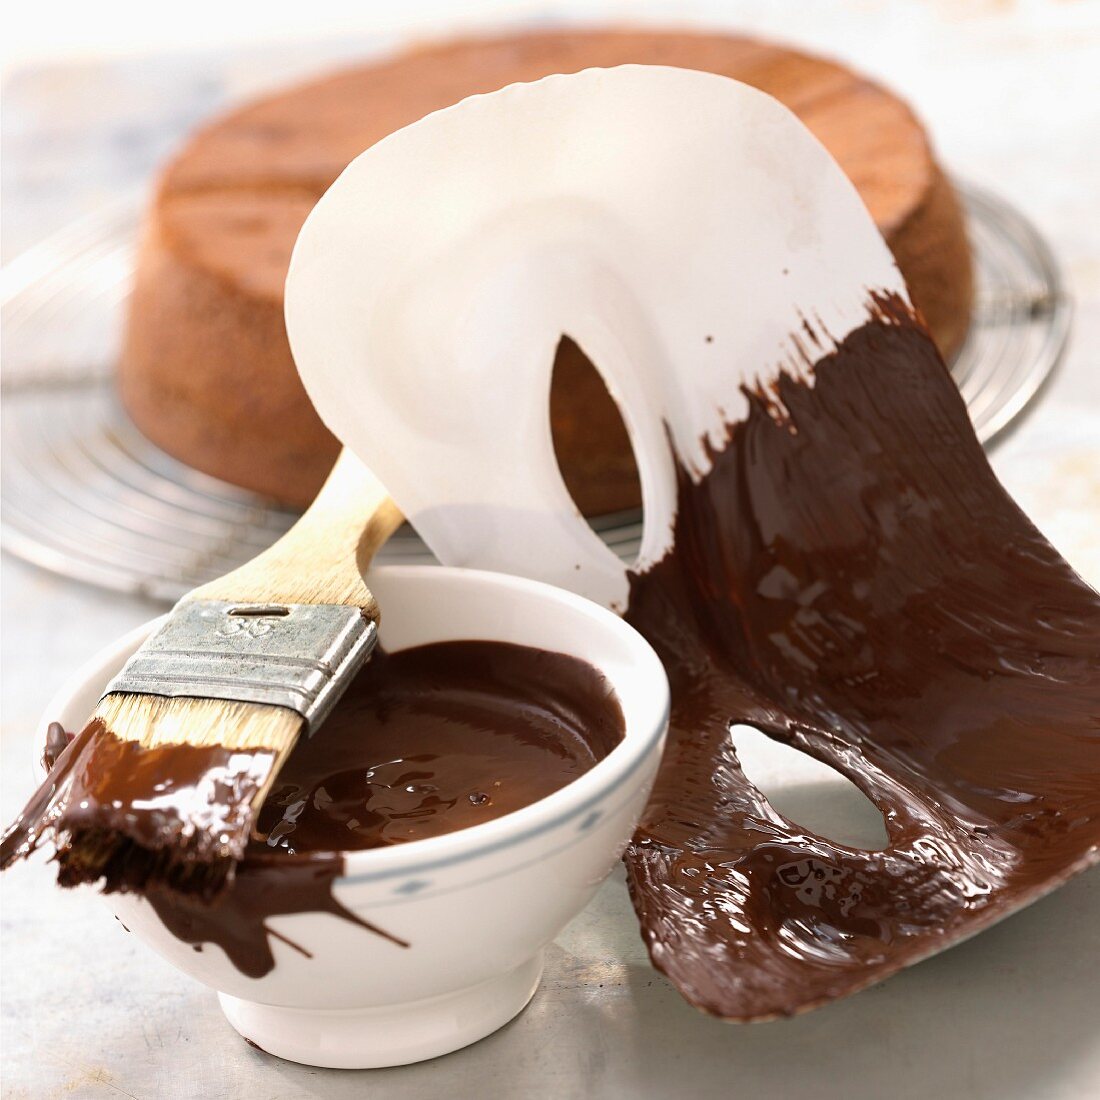 A mask being brushed with chocolate